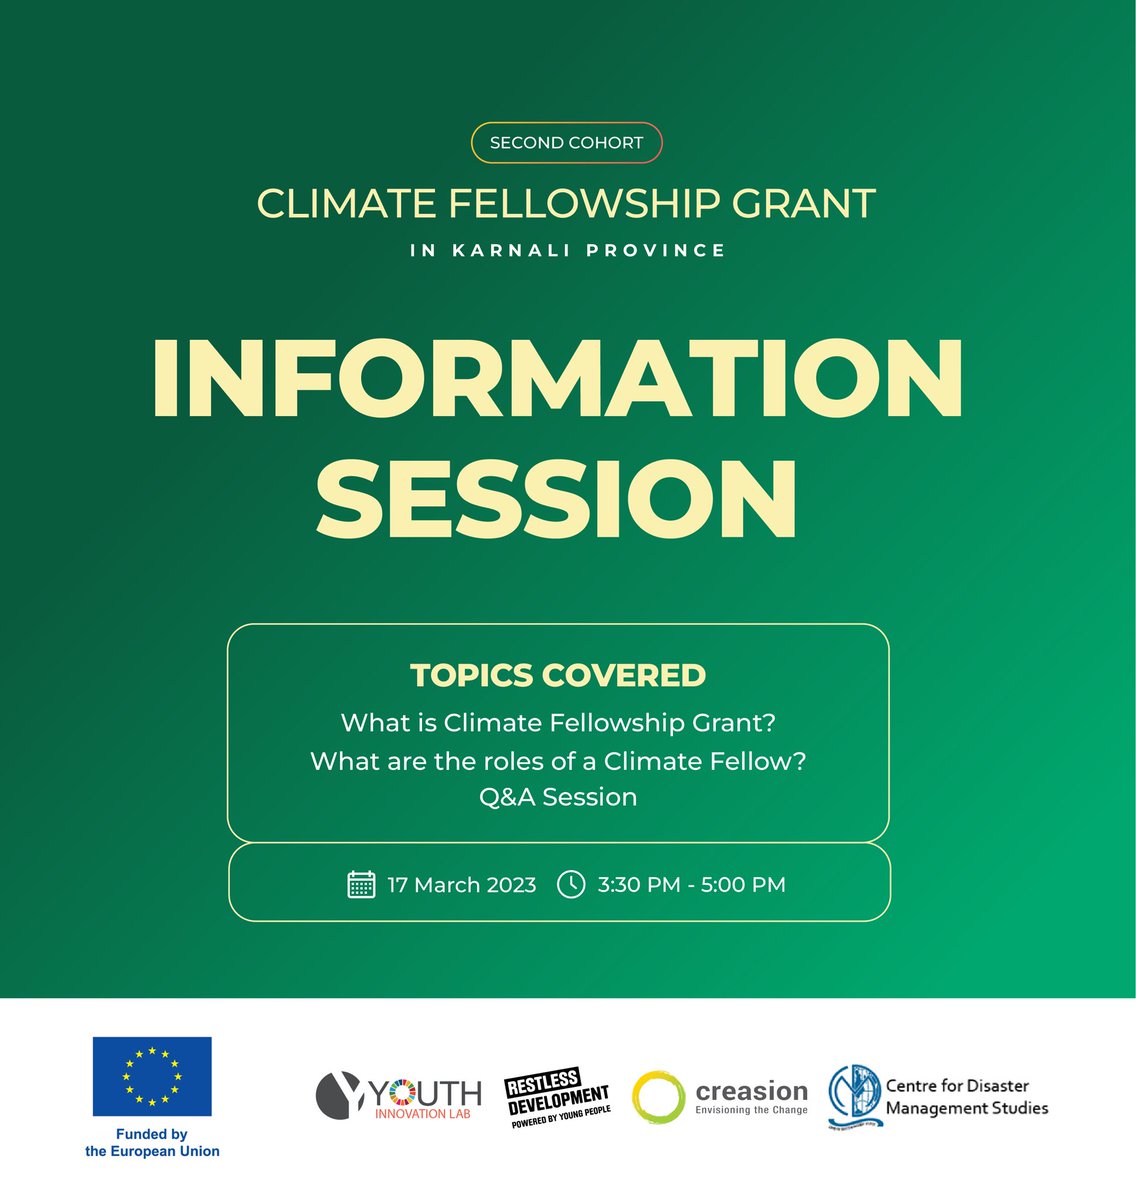 📢 Happening Now 
Join the information session today from 3:30-5:00 PM to learn more about Climate Fellowship Grant 2023.

🔗Meeting Link: bit.ly/3JMVBha
 
#TheYouthCan #climatefellowship #climatefellowshipgrant #bipadlocalization #ldcrp #Karnali